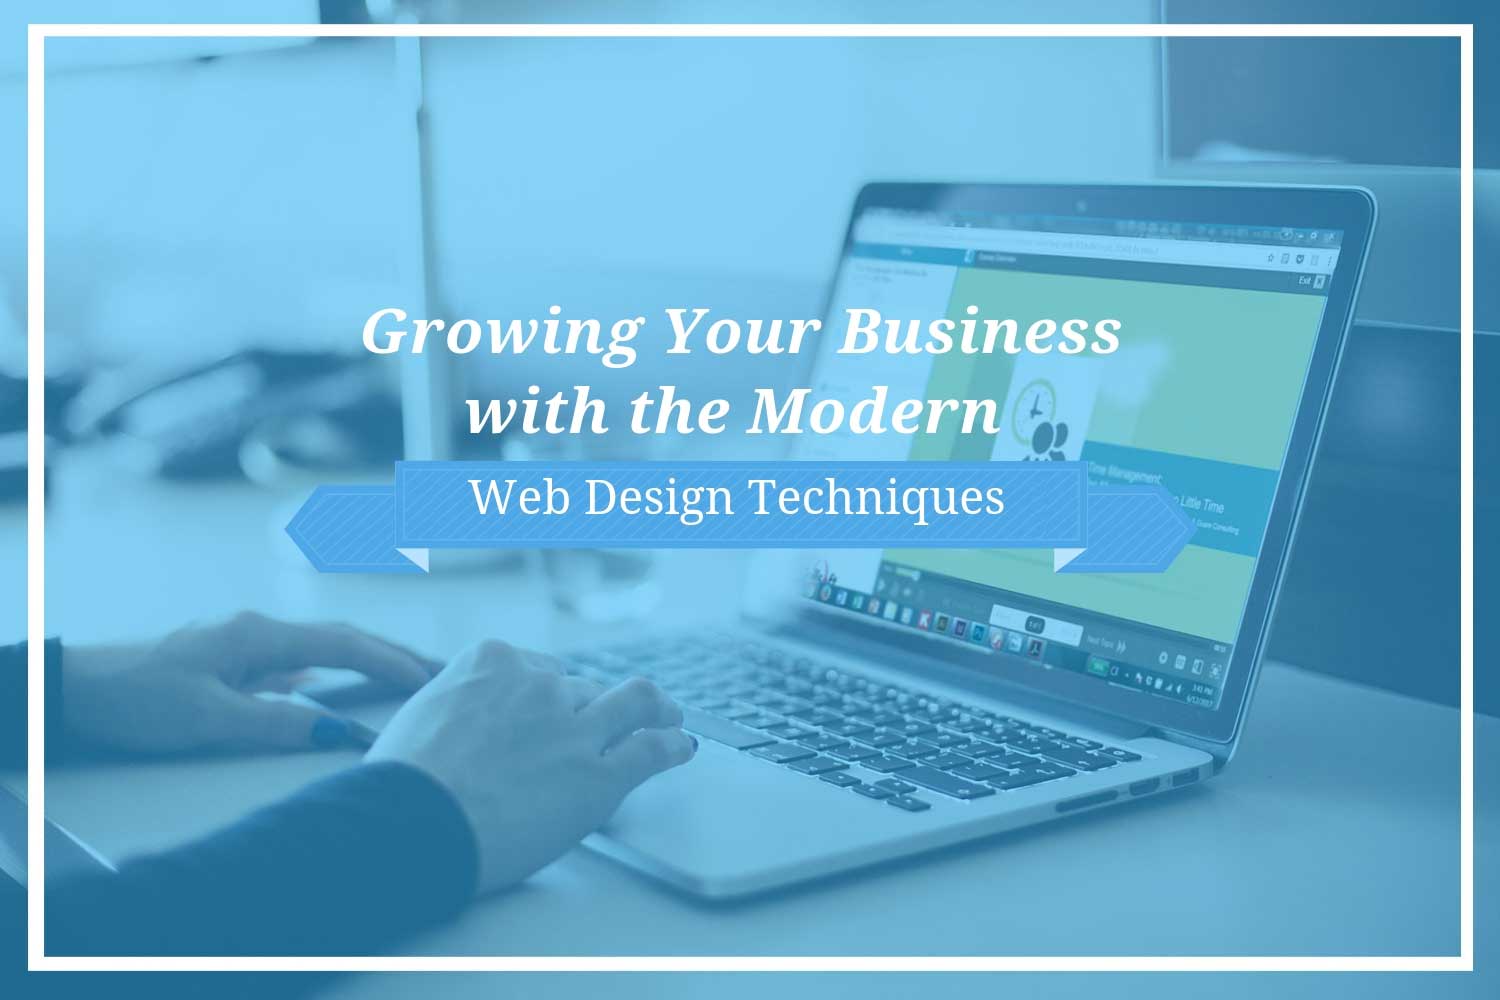 Growing Your Business with the Modern Web Design Techniques